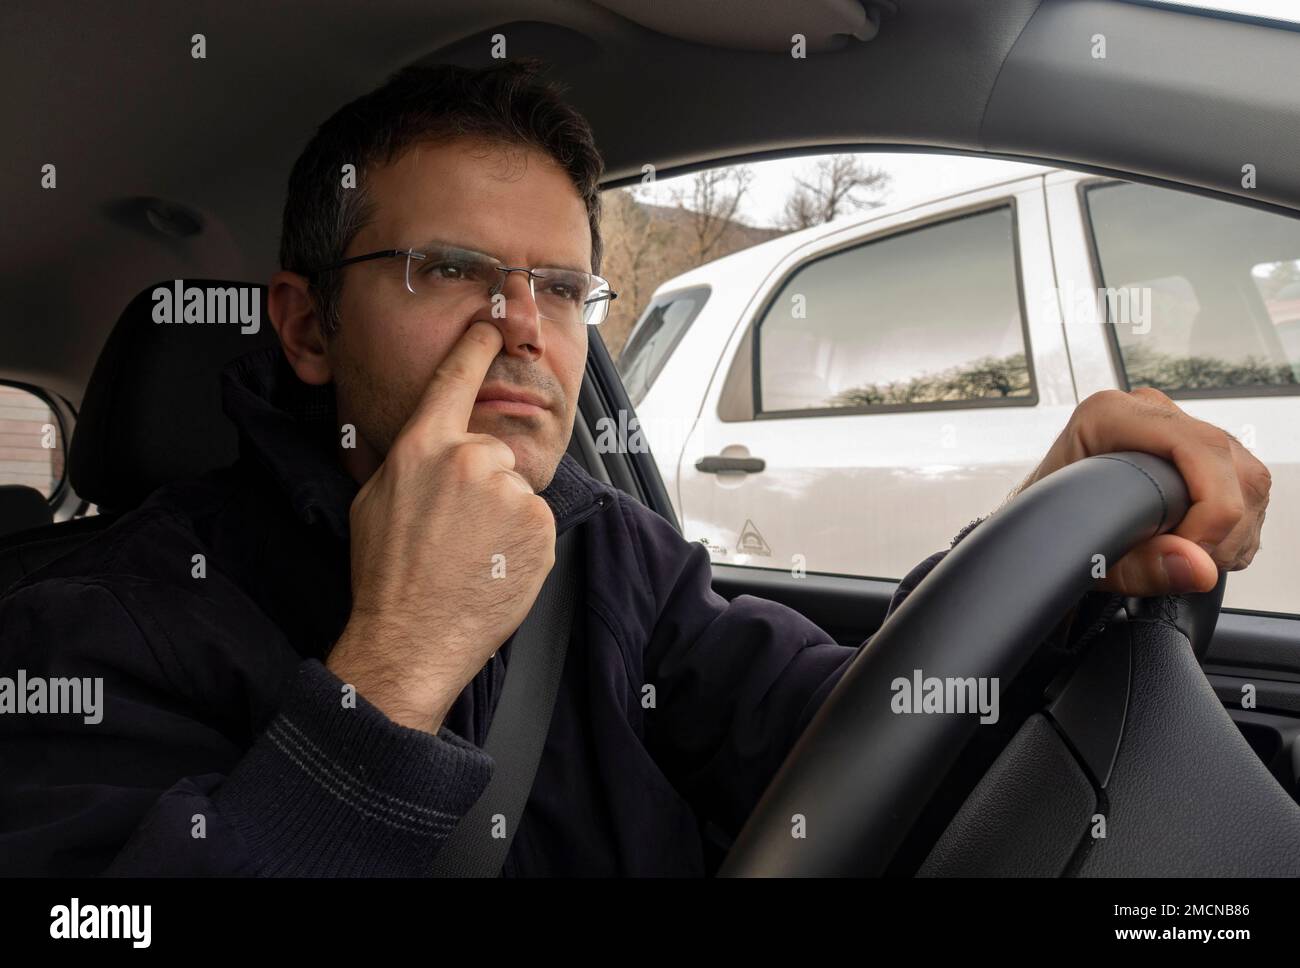 https://c8.alamy.com/comp/2MCNB86/man-in-car-with-finger-into-nose-while-driving-2MCNB86.jpg